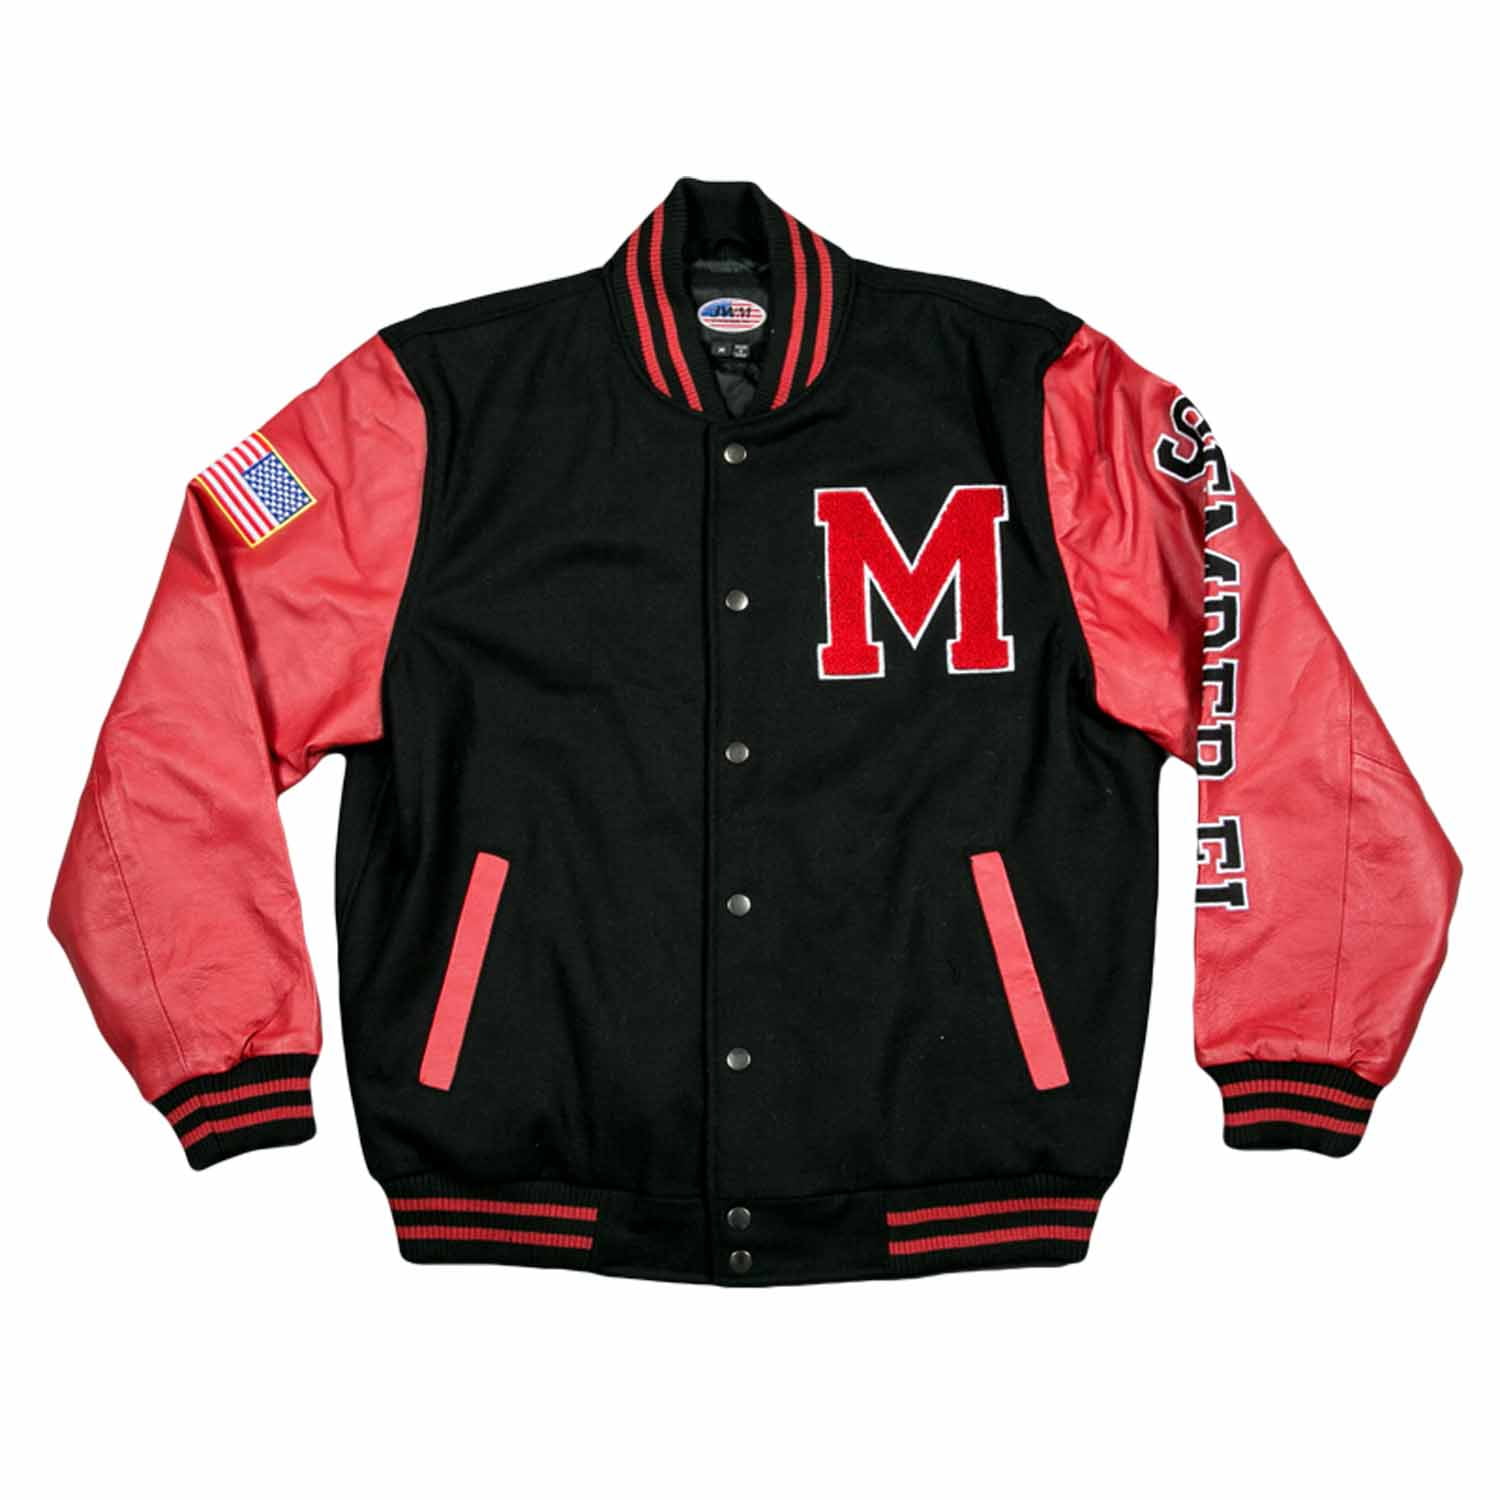 Jwm Military Mens Leather Polyester Embroidered Varsity Jacket Marines